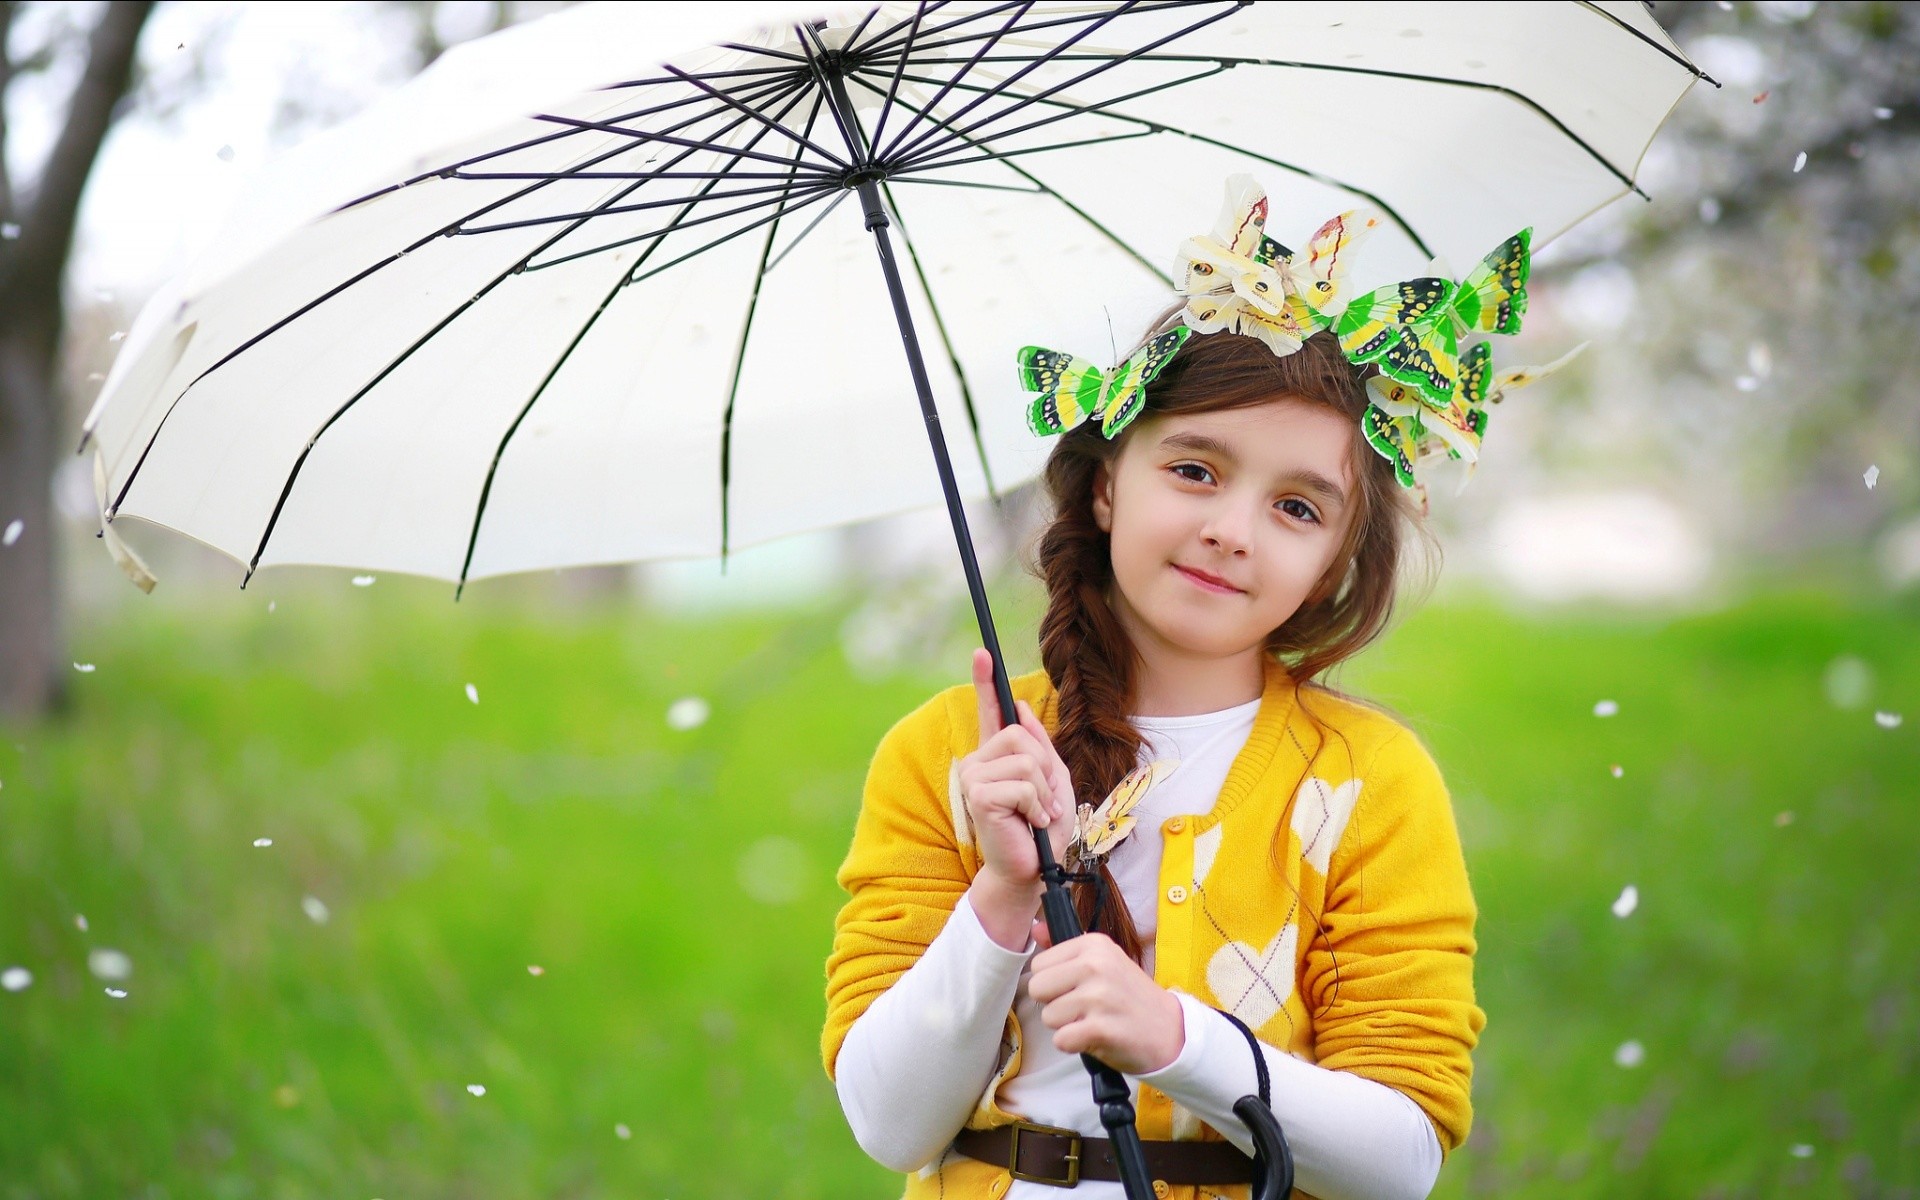 Find out Cute Baby Girl with White Umbrella wallpaper on https / / hdpicorner